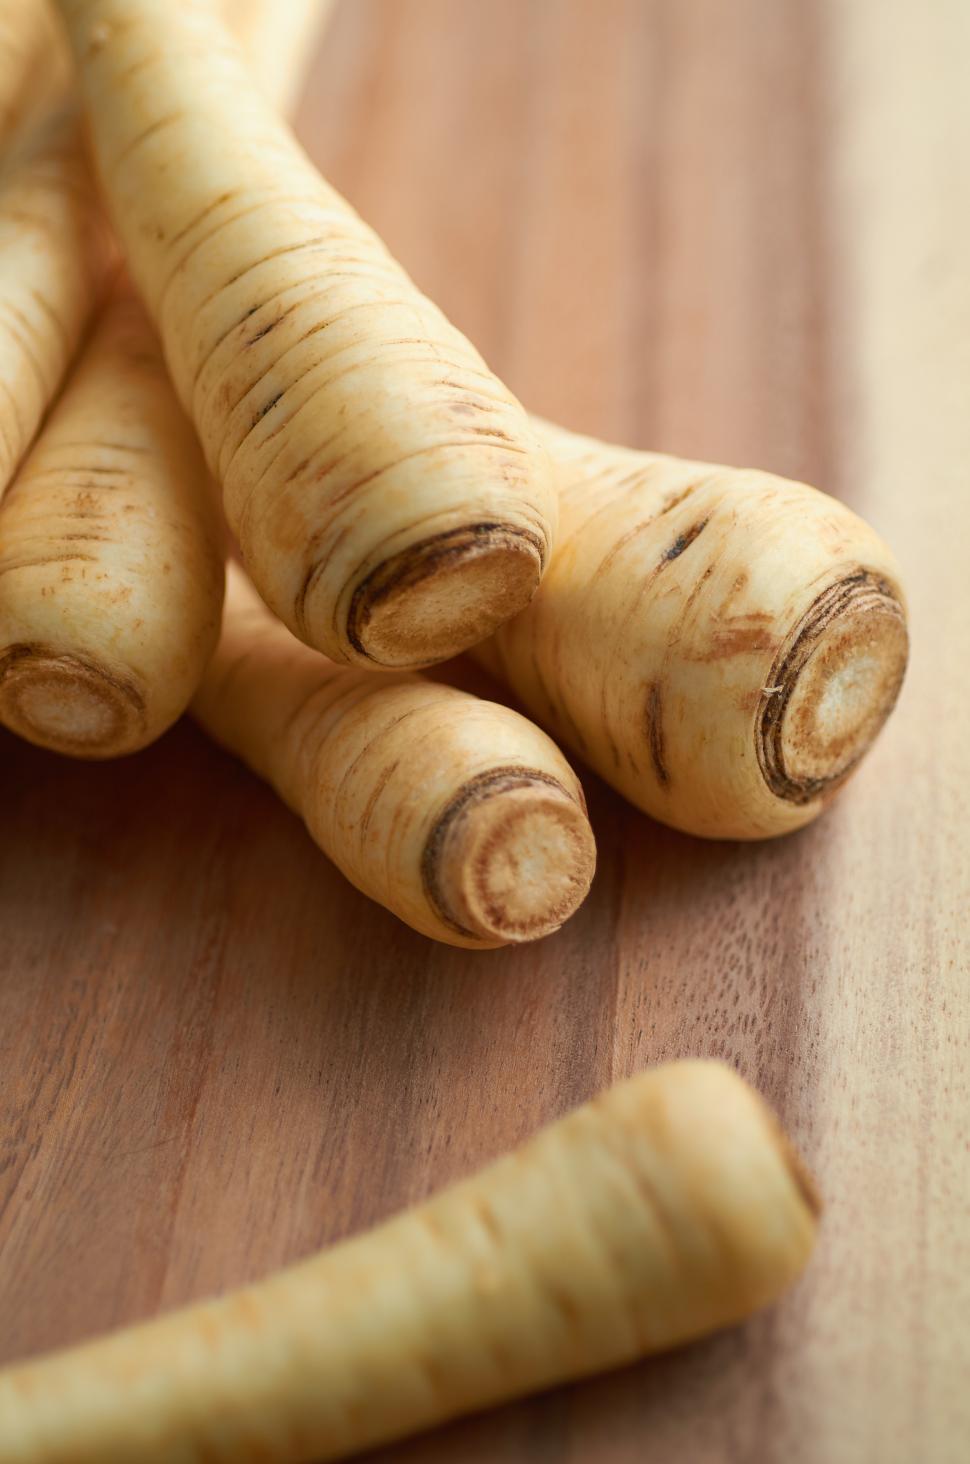 Free Image of A group of parsnips on a wood surface 